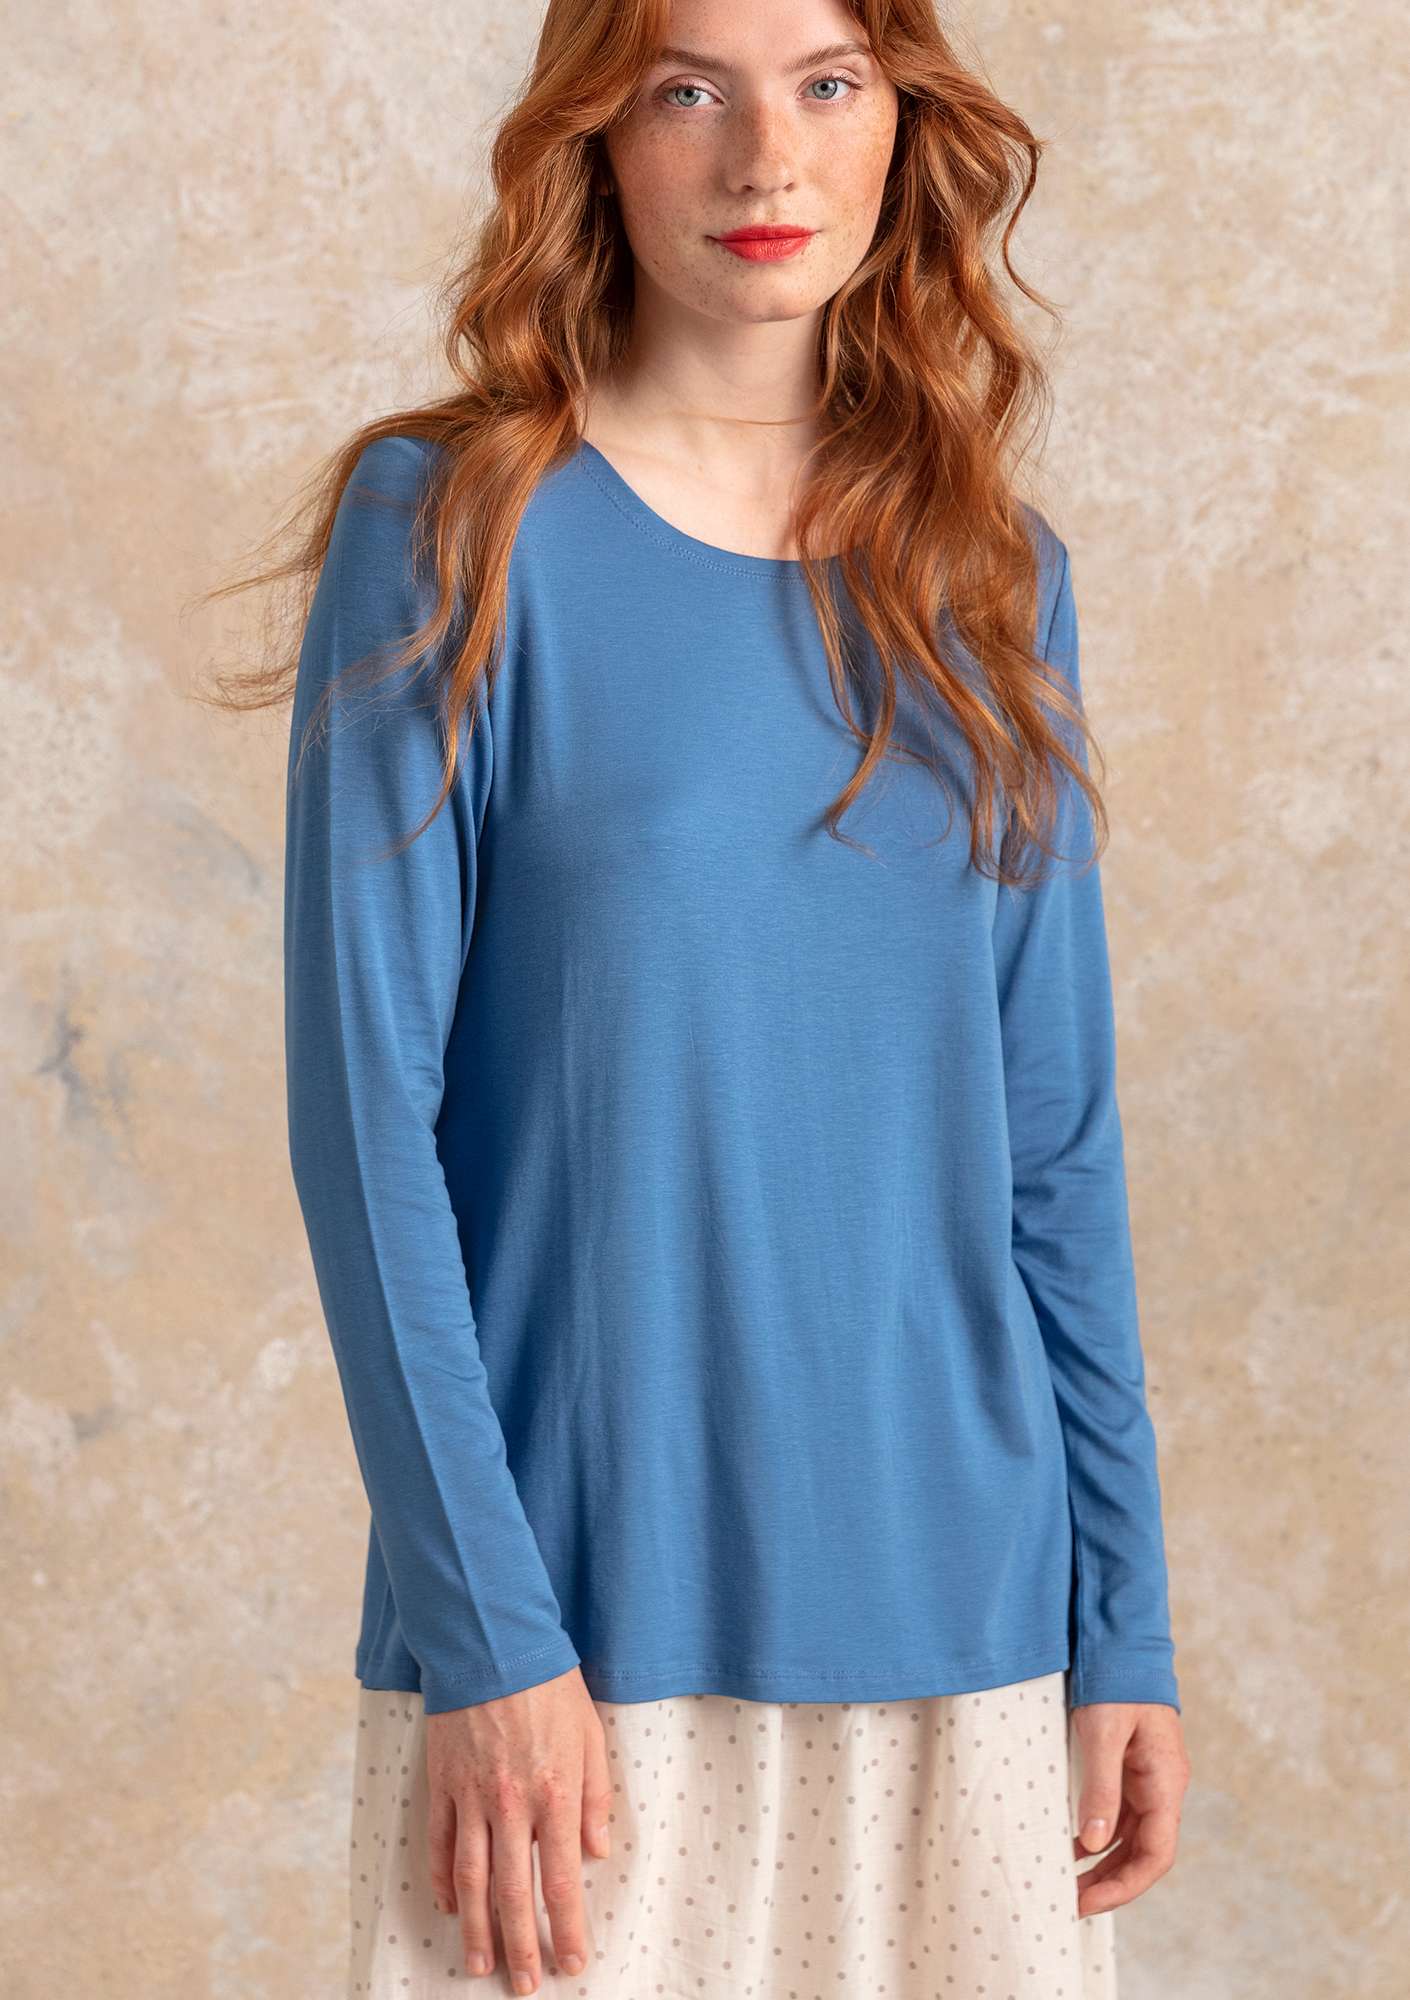 “Adena” jersey top in lyocell/spandex flax blue